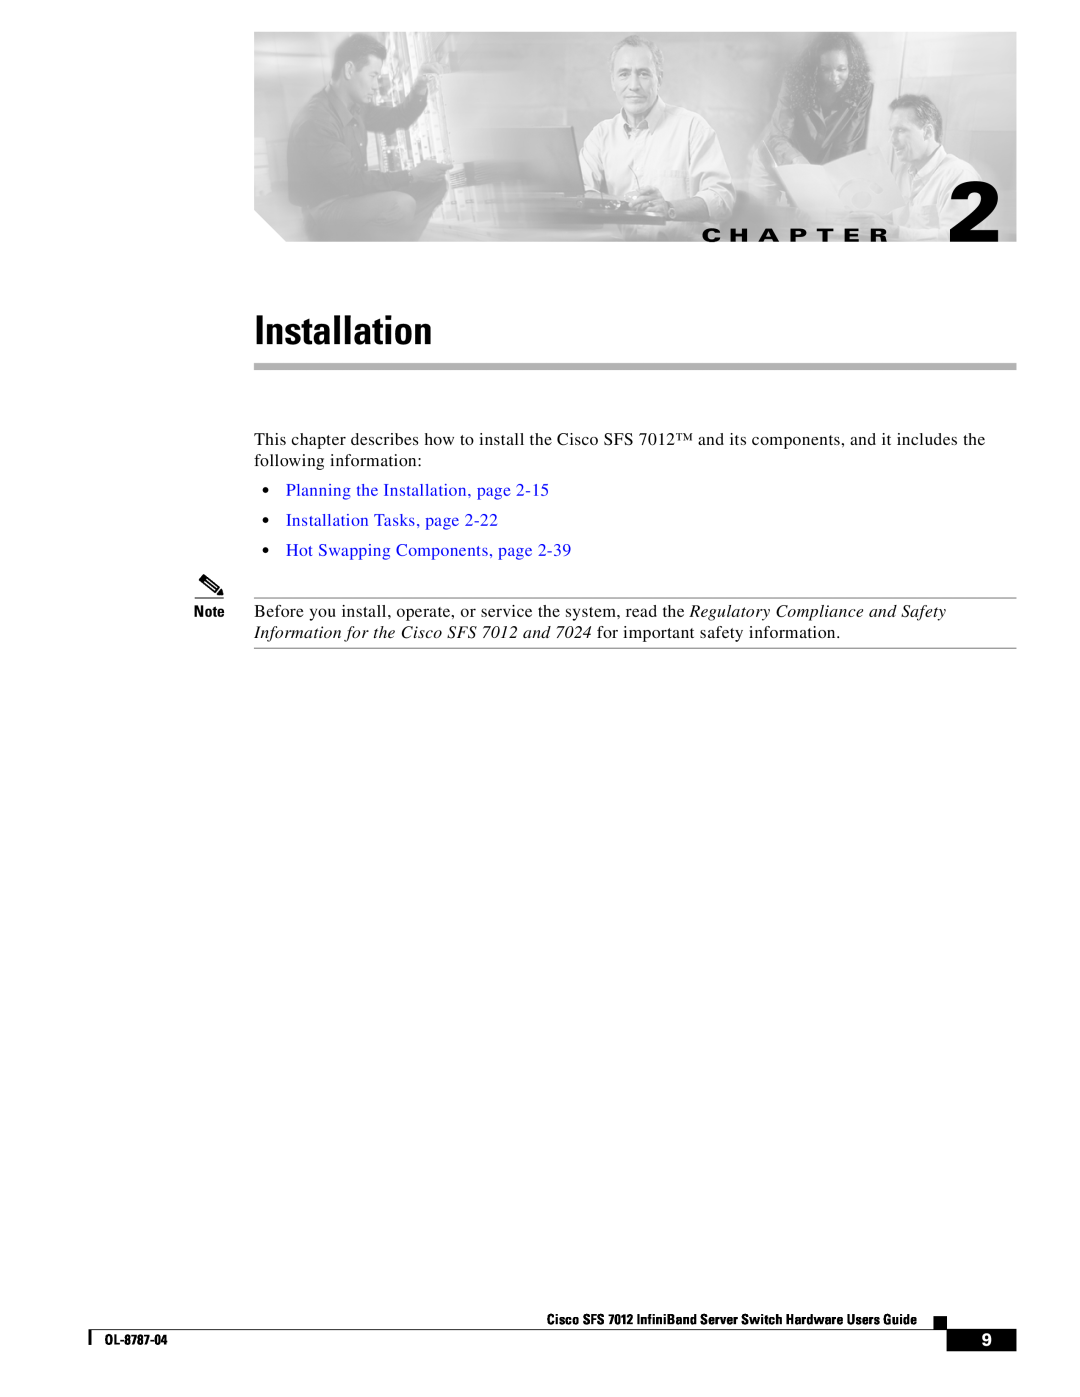 Cisco Systems SFS 7012 manual C H A P T E R, Planning the Installation, page Installation Tasks, page 